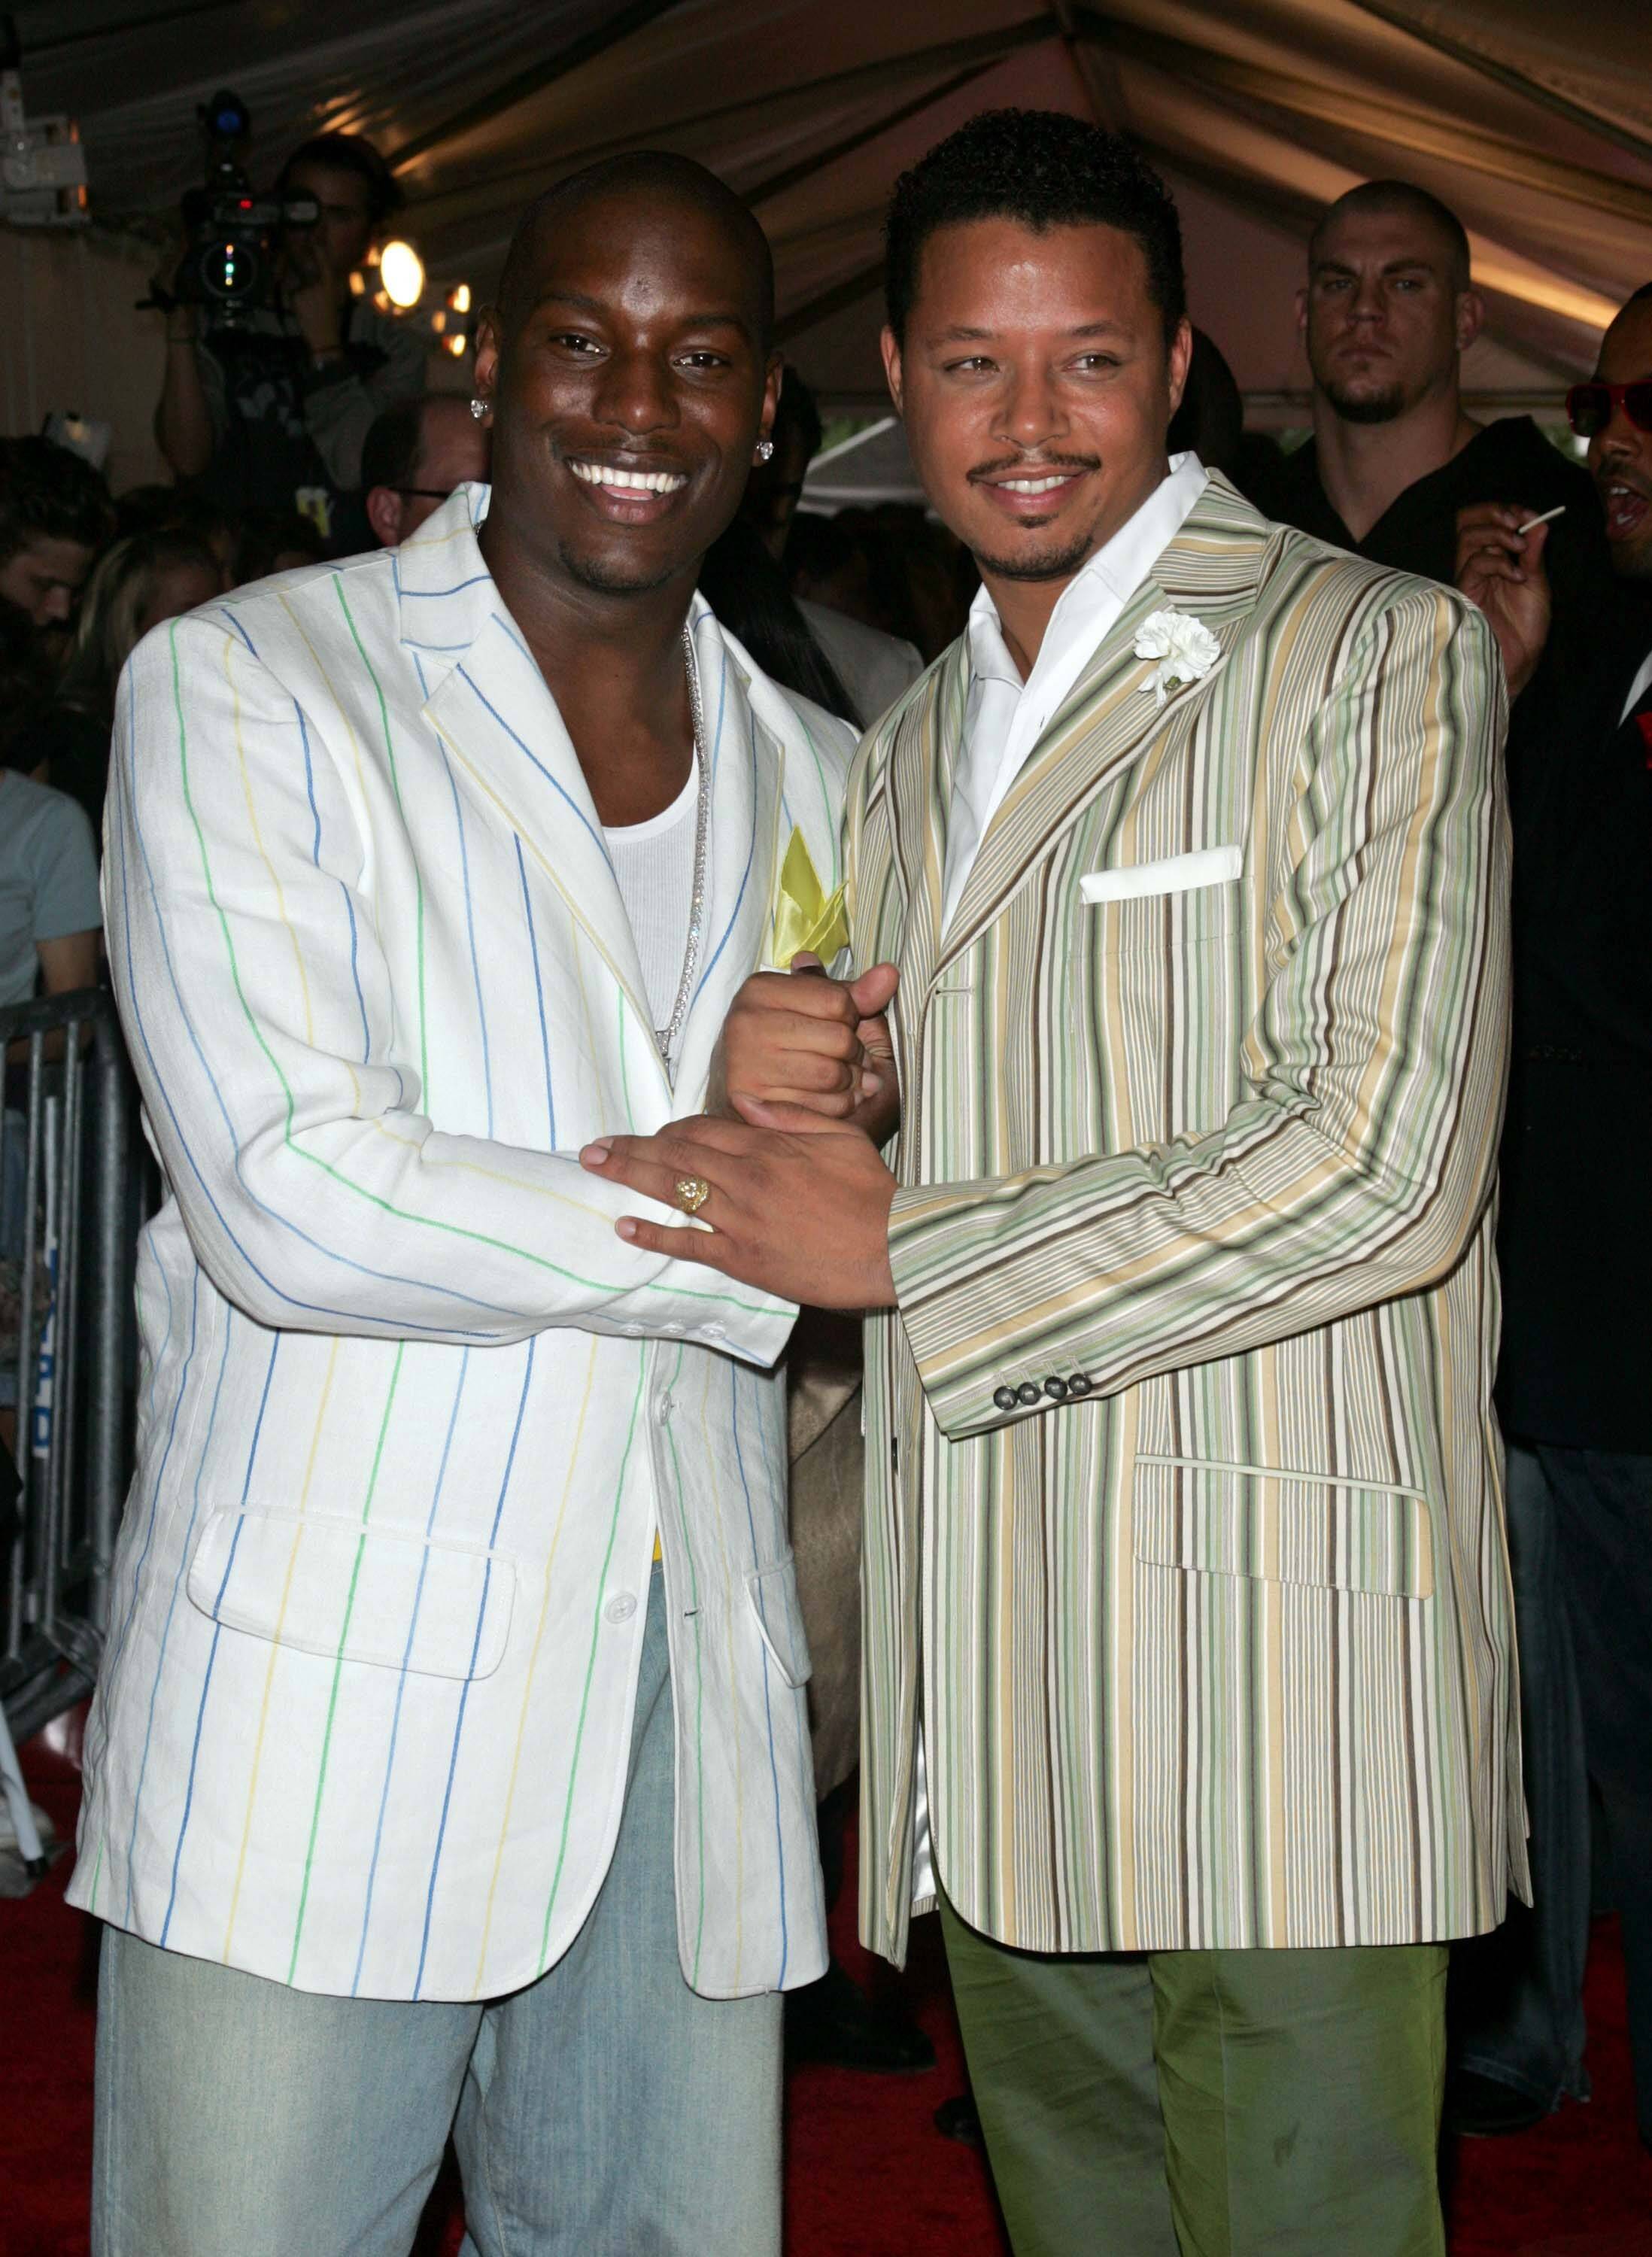 Tyrese Gibson and Terrence Howard on BET Buzz 2021